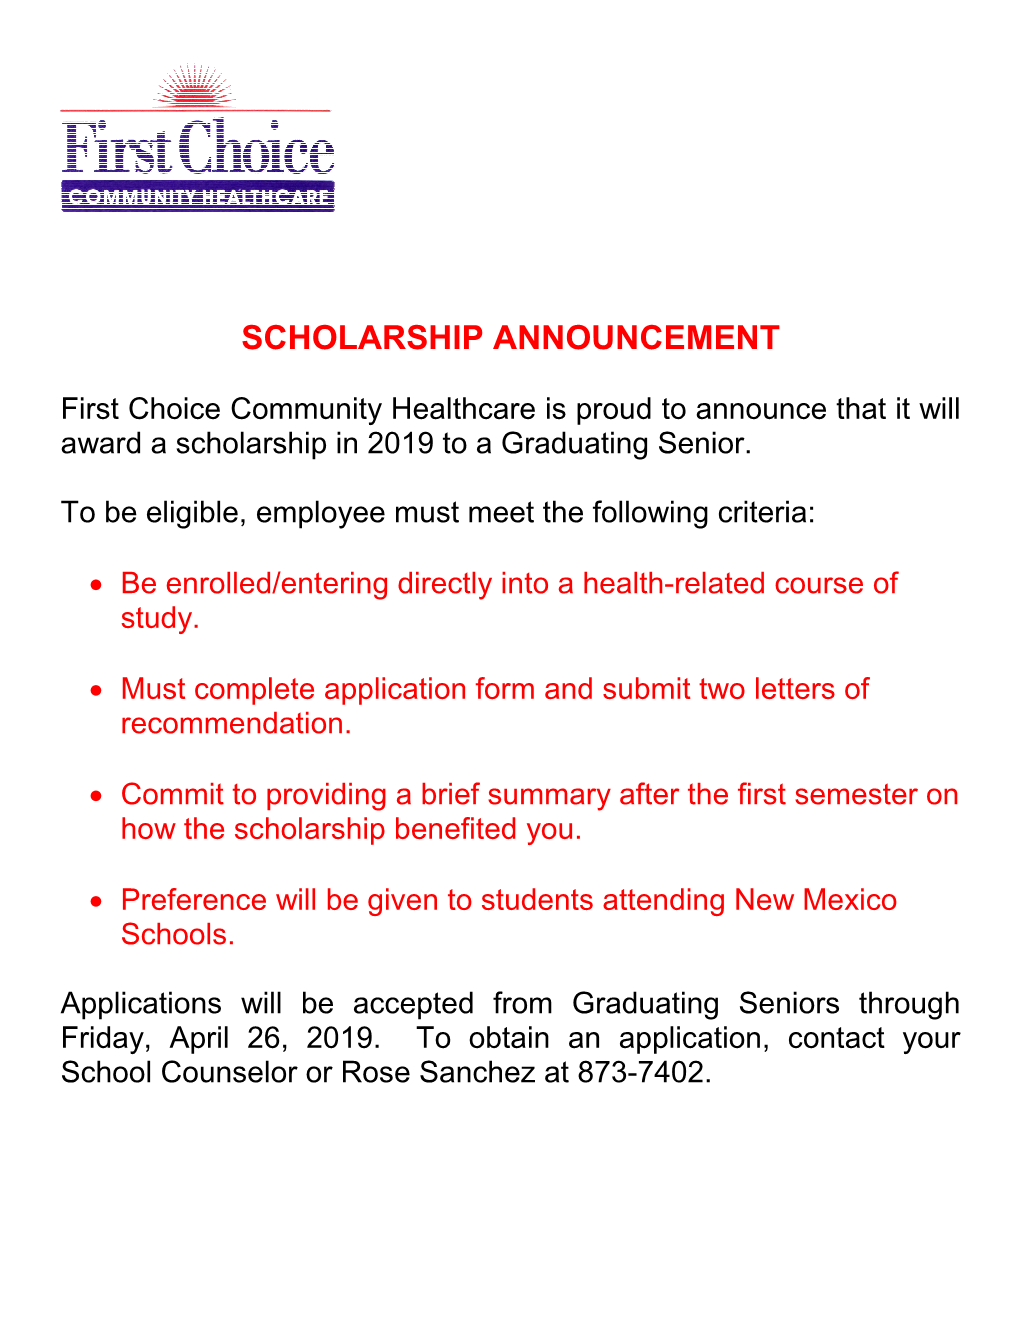 2019 Fcch Scholarship Announcement and Student